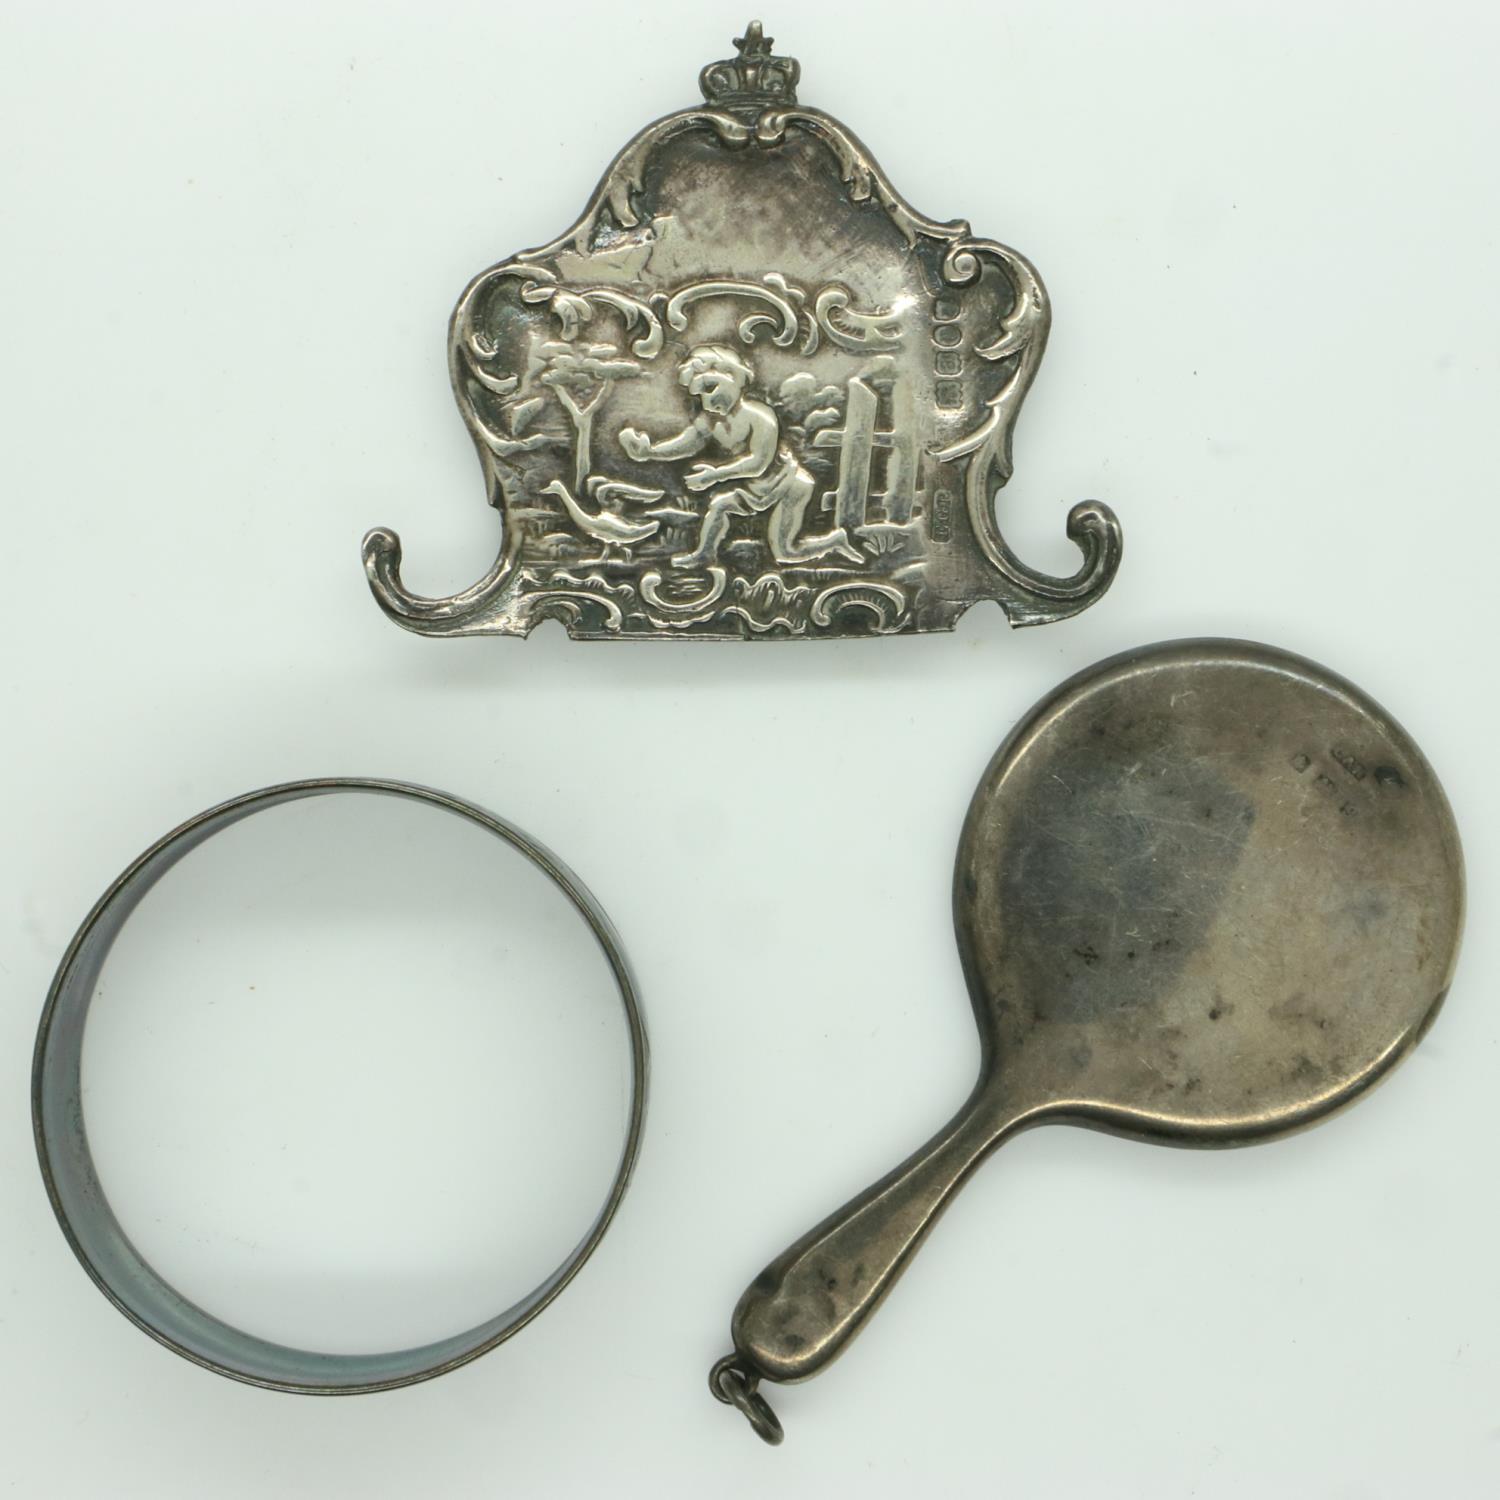 Mixed silver including a Georgian buckle, napkin ring and miniature hand mirror. UK P&P Group 1 (£